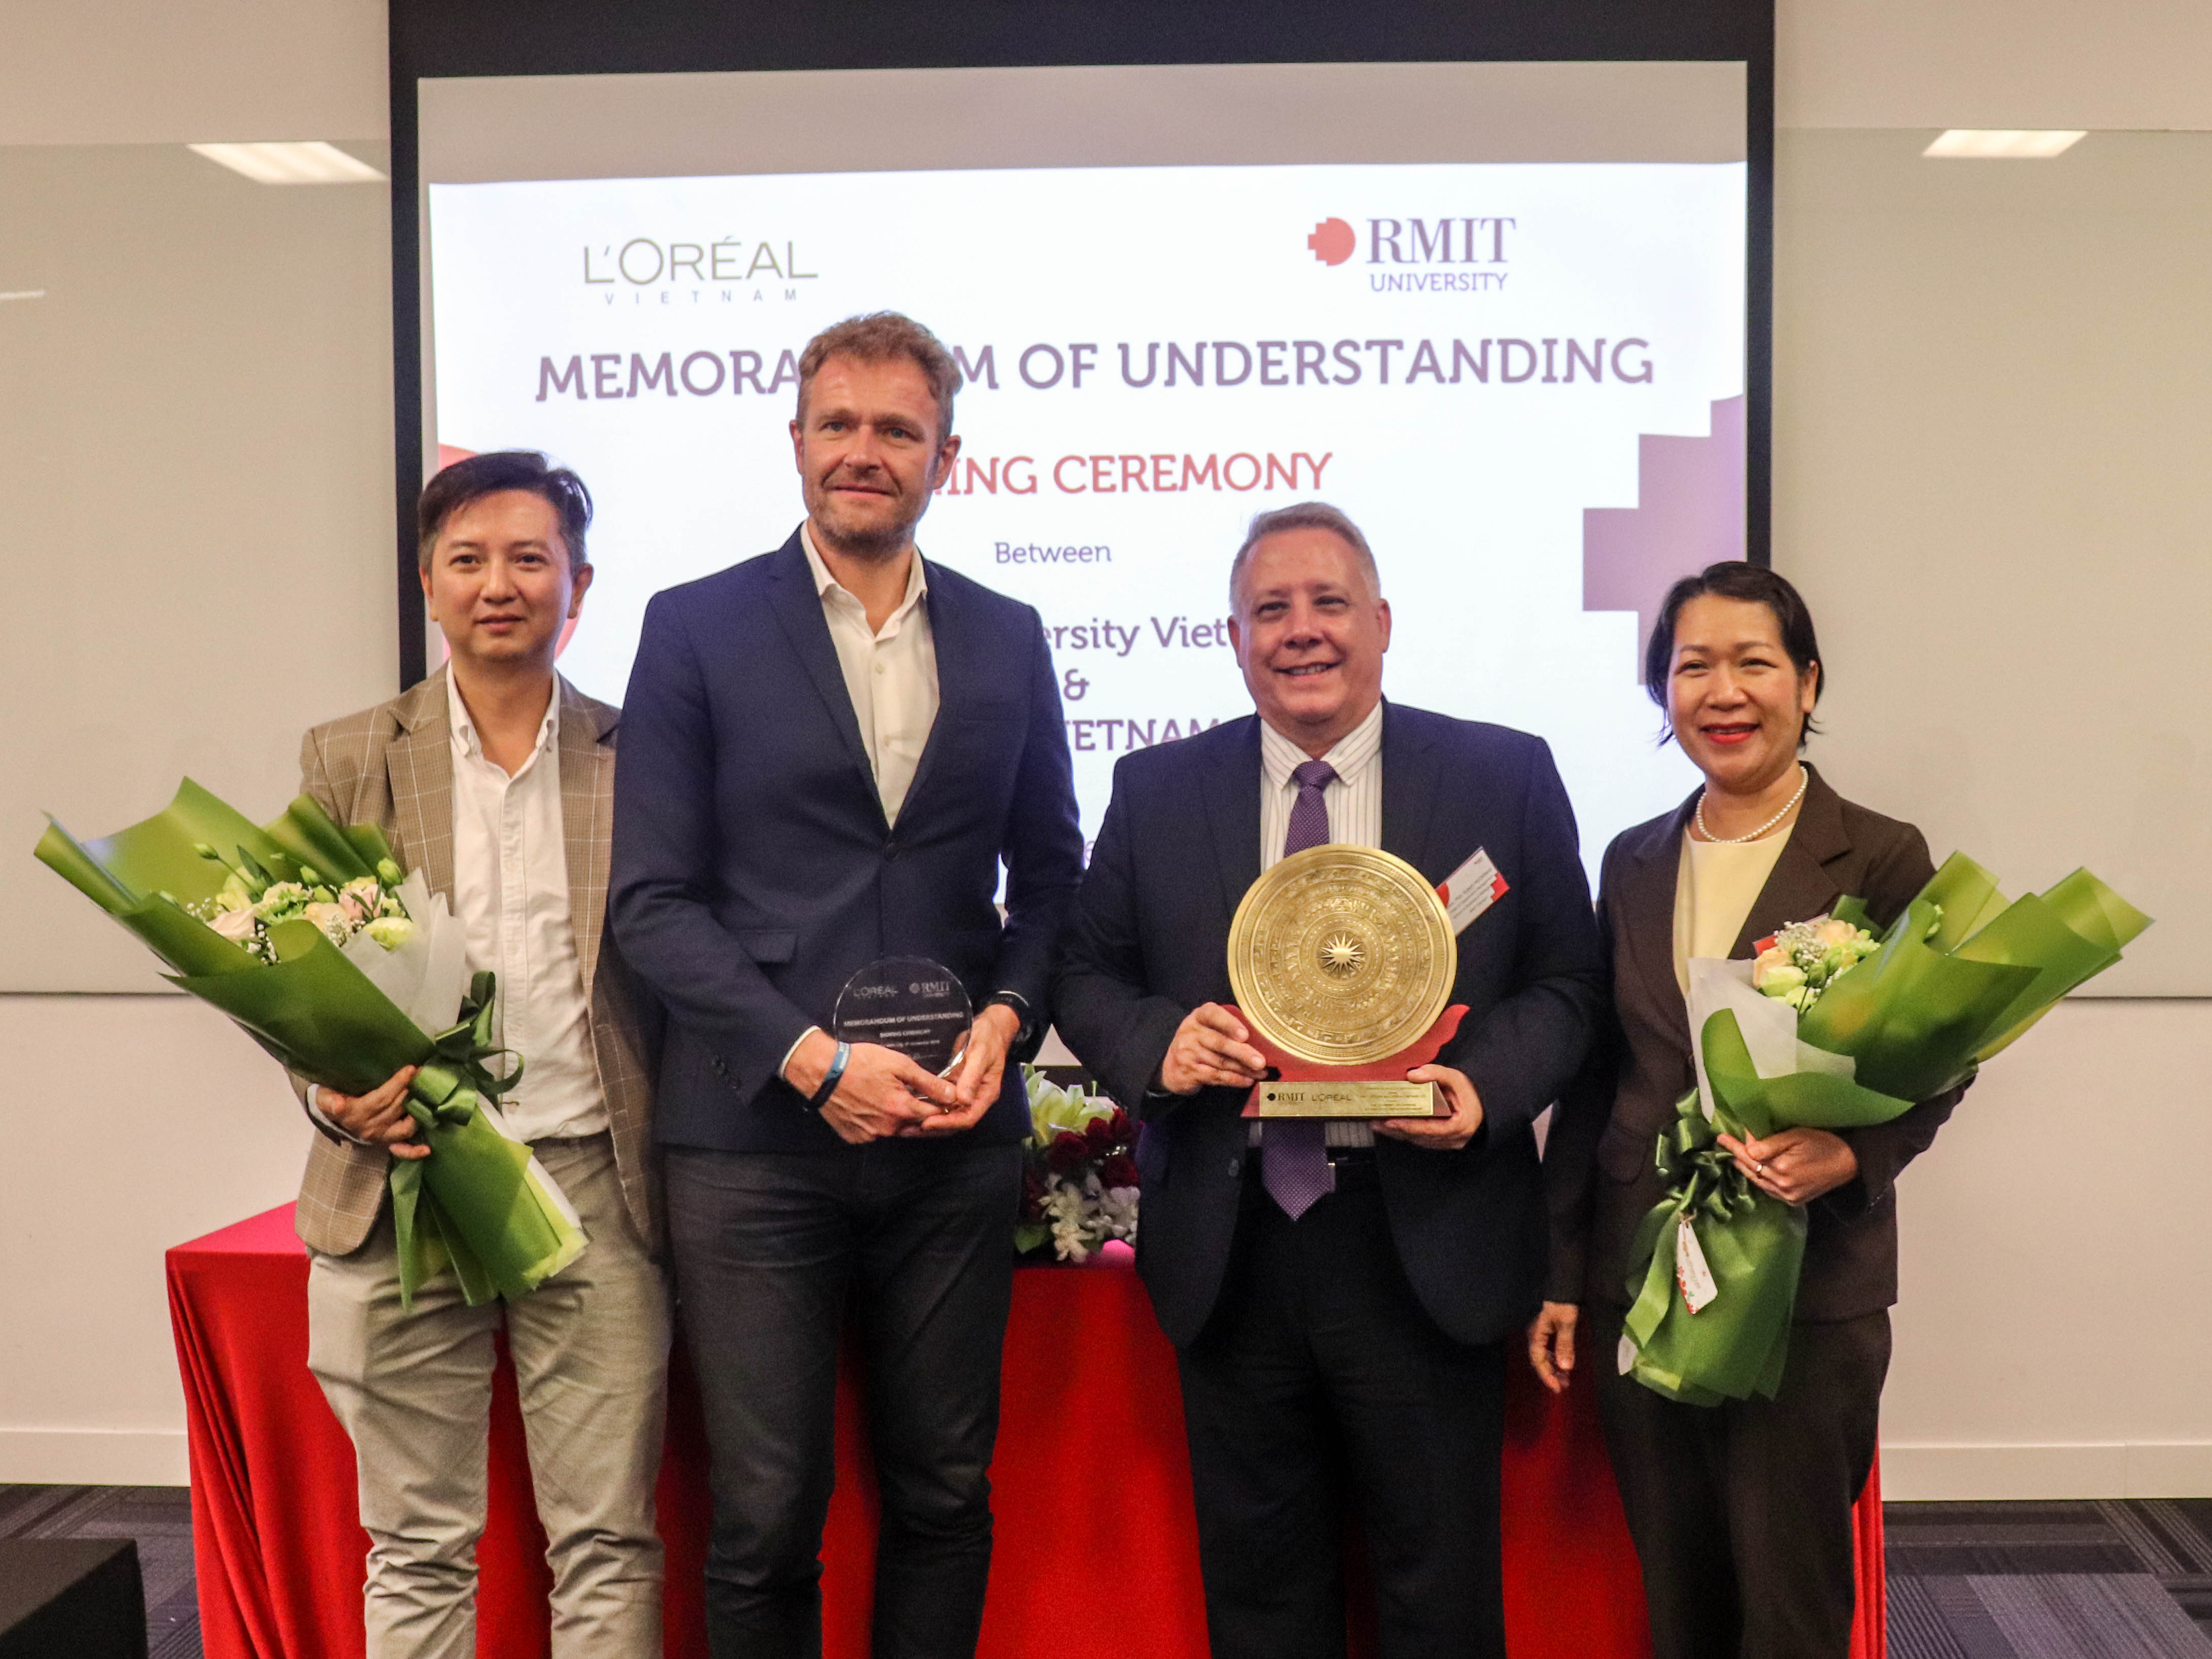 (From left to right) L’Oreal Vietnam Human Resources Director Pham Manh Khoi, L'Oreal Vietnam General Director Valery Gaucherand, RMIT Vietnam Head of Department of Management Associate Professor Robert McClelland, and RMIT Vietnam Lecturer Nguyen Anh Thu at the MoU signing ceremony.